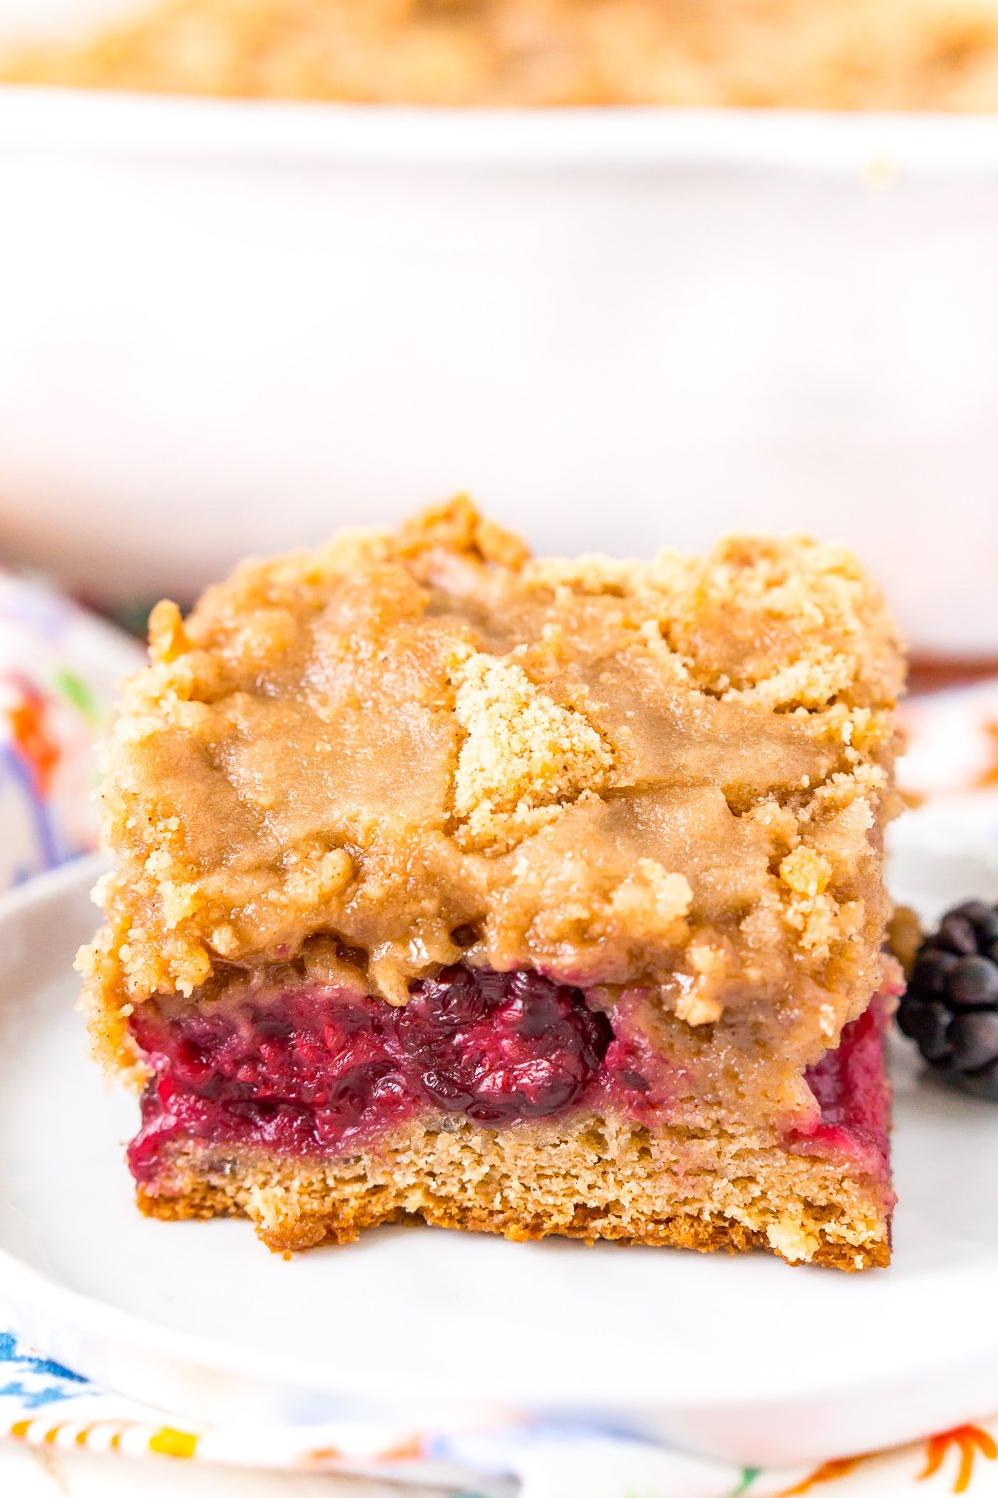  Sink your teeth into a moist and fluffy cake topped with cinnamon streusel and fresh blackberries.